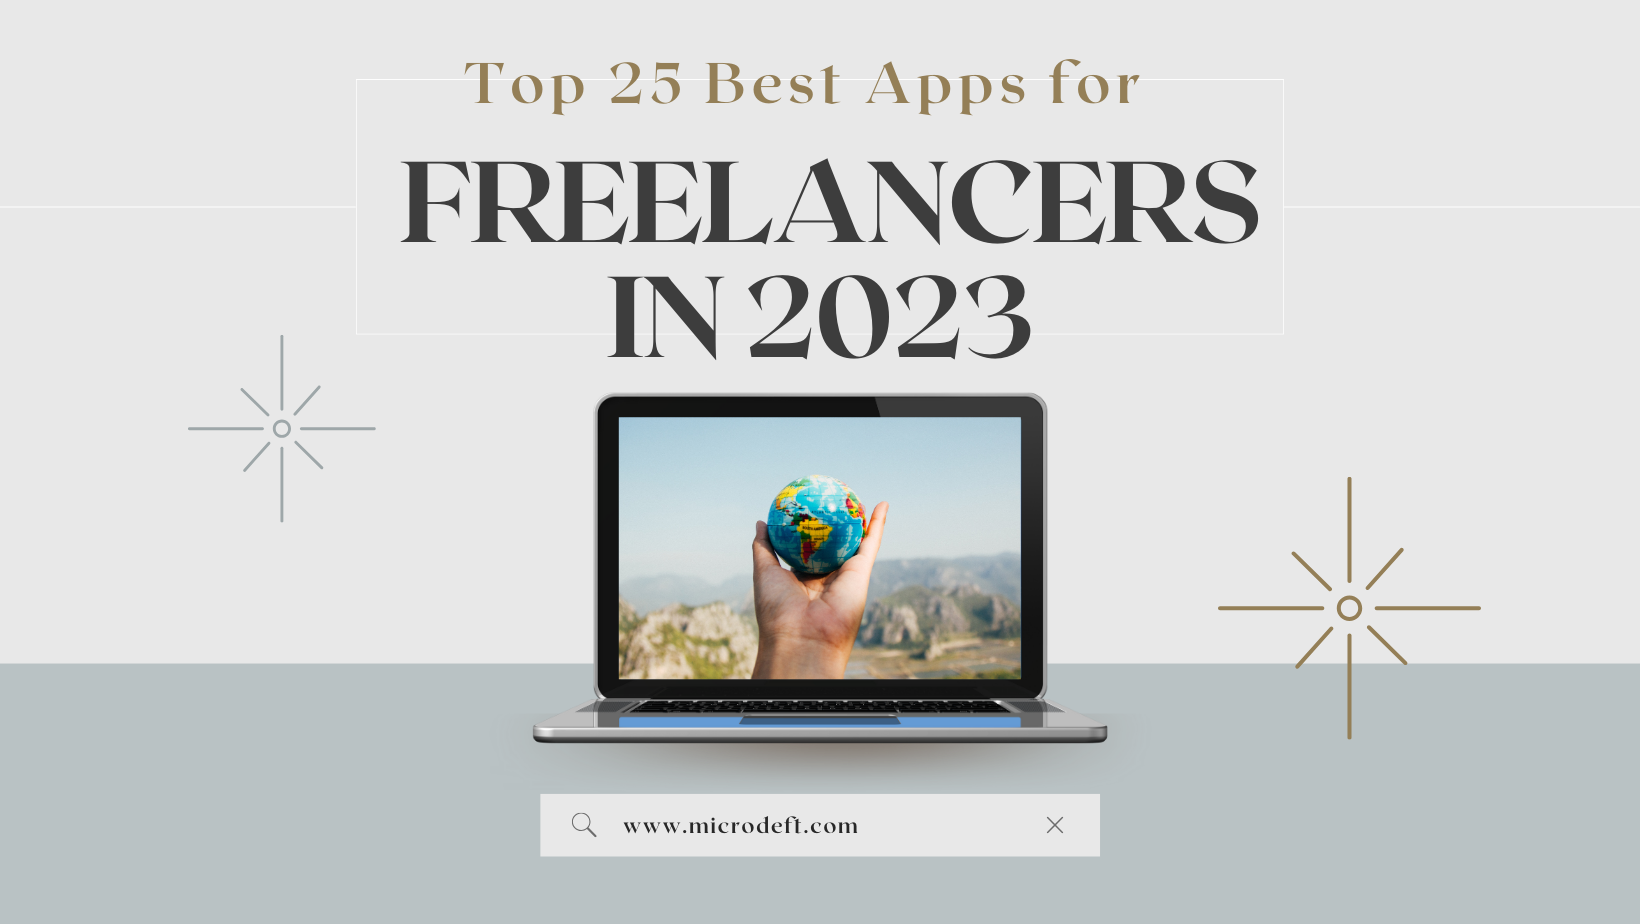 Top 25 Best Apps for Freelancers in 2023